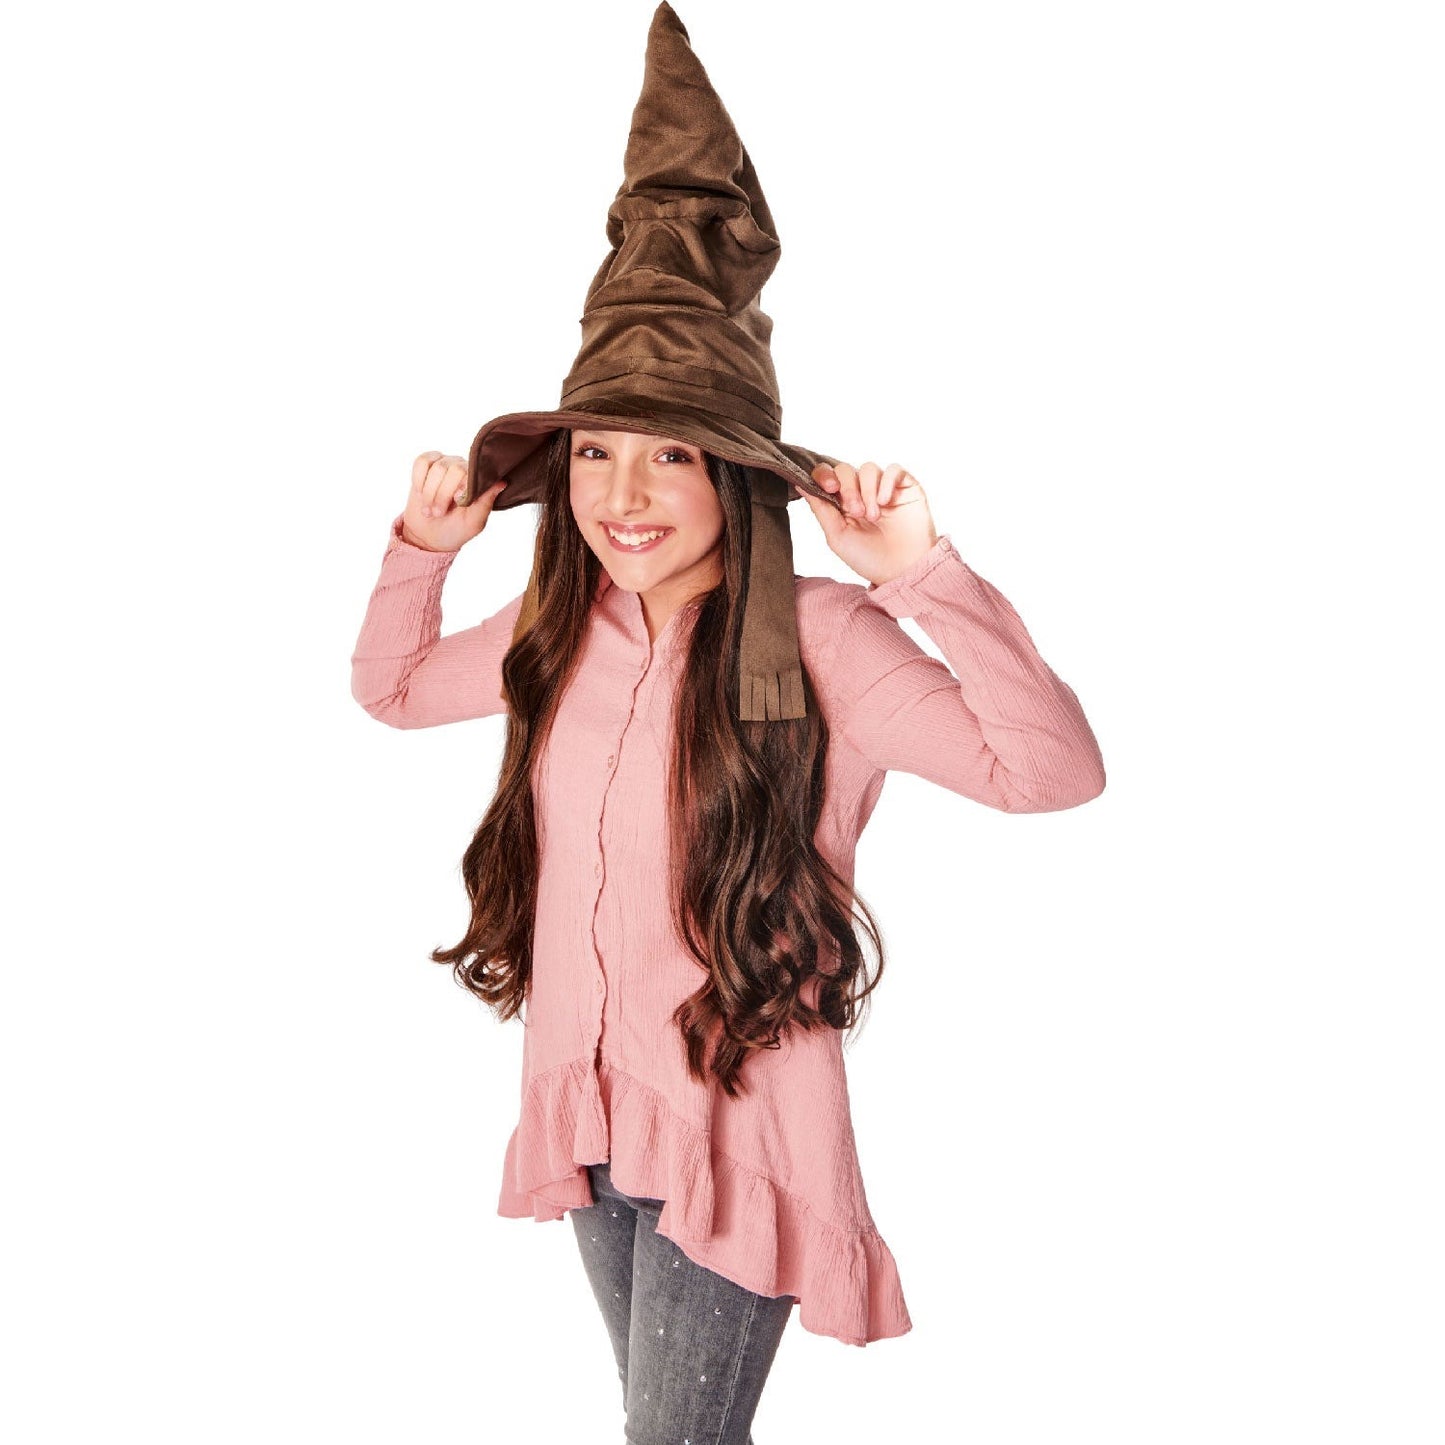 Spin Master - Harry Potter Sorting Hat 6063054